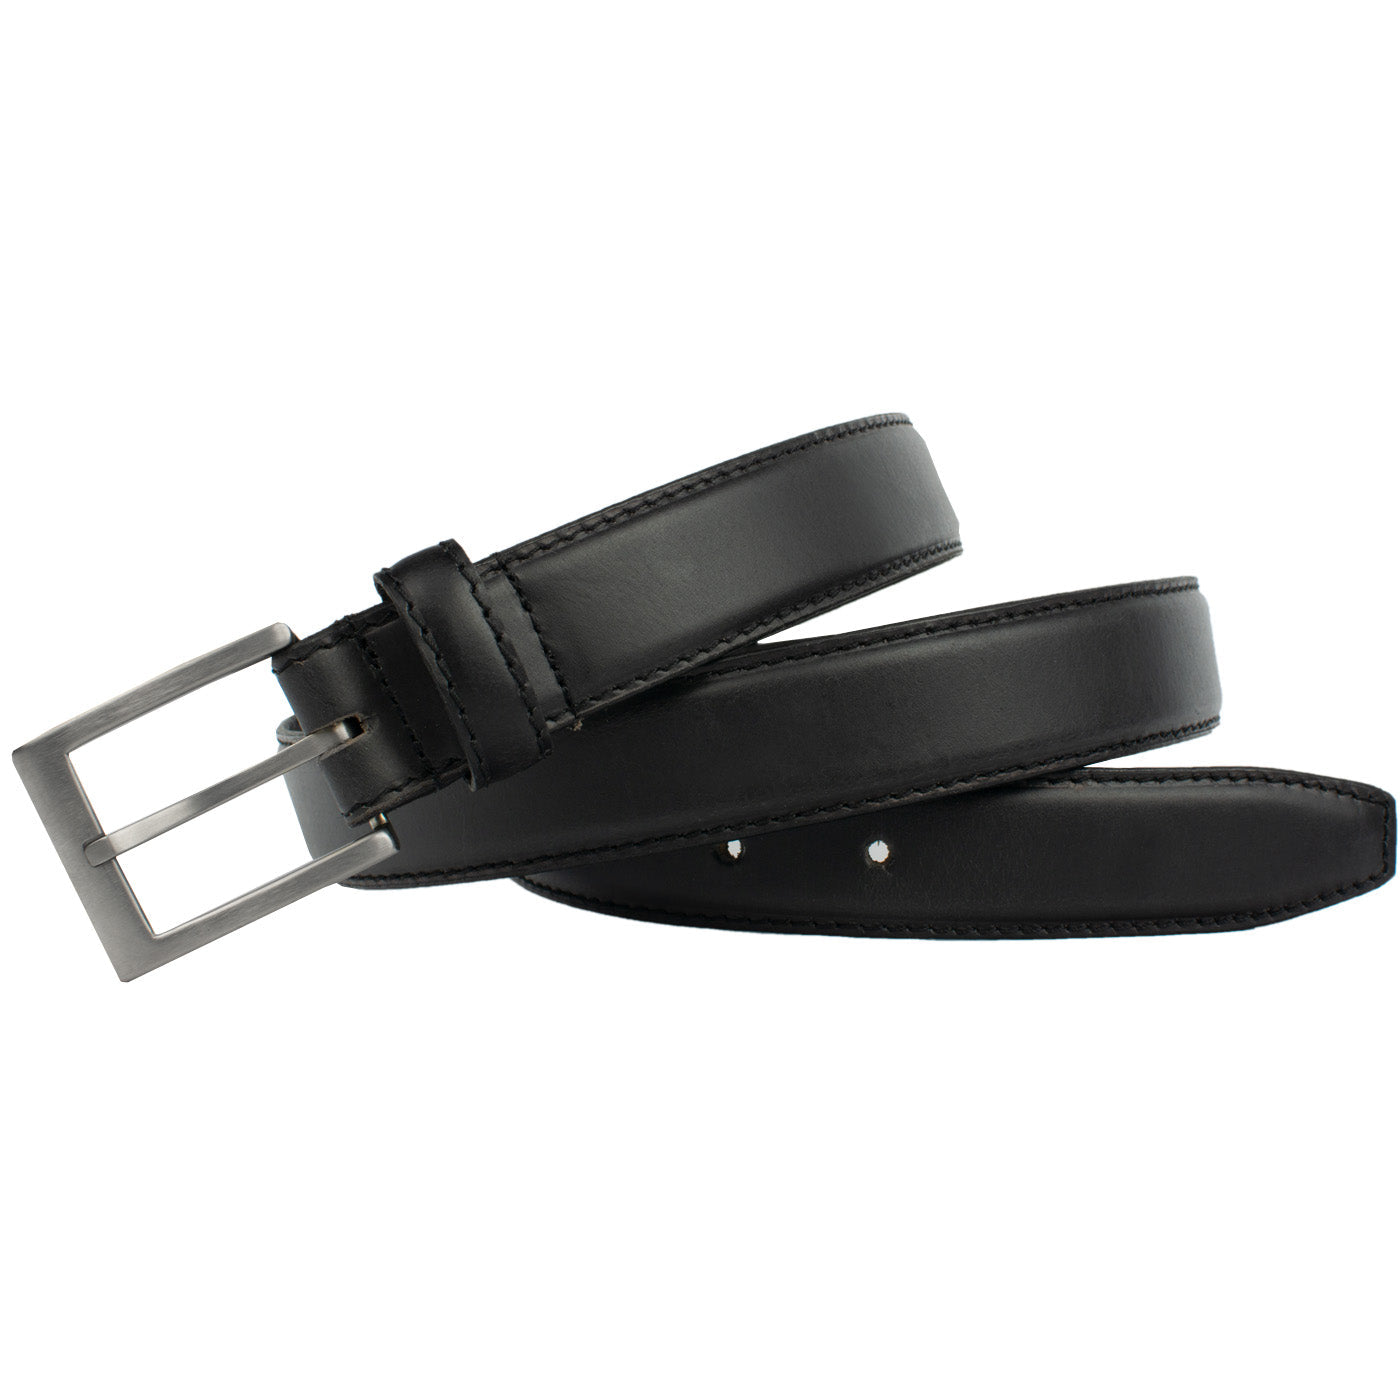 Made in USA 1.5 inch Black Genuine Leather Belt | Titanium Buckle 40 inch / Black / Titanium/Leather